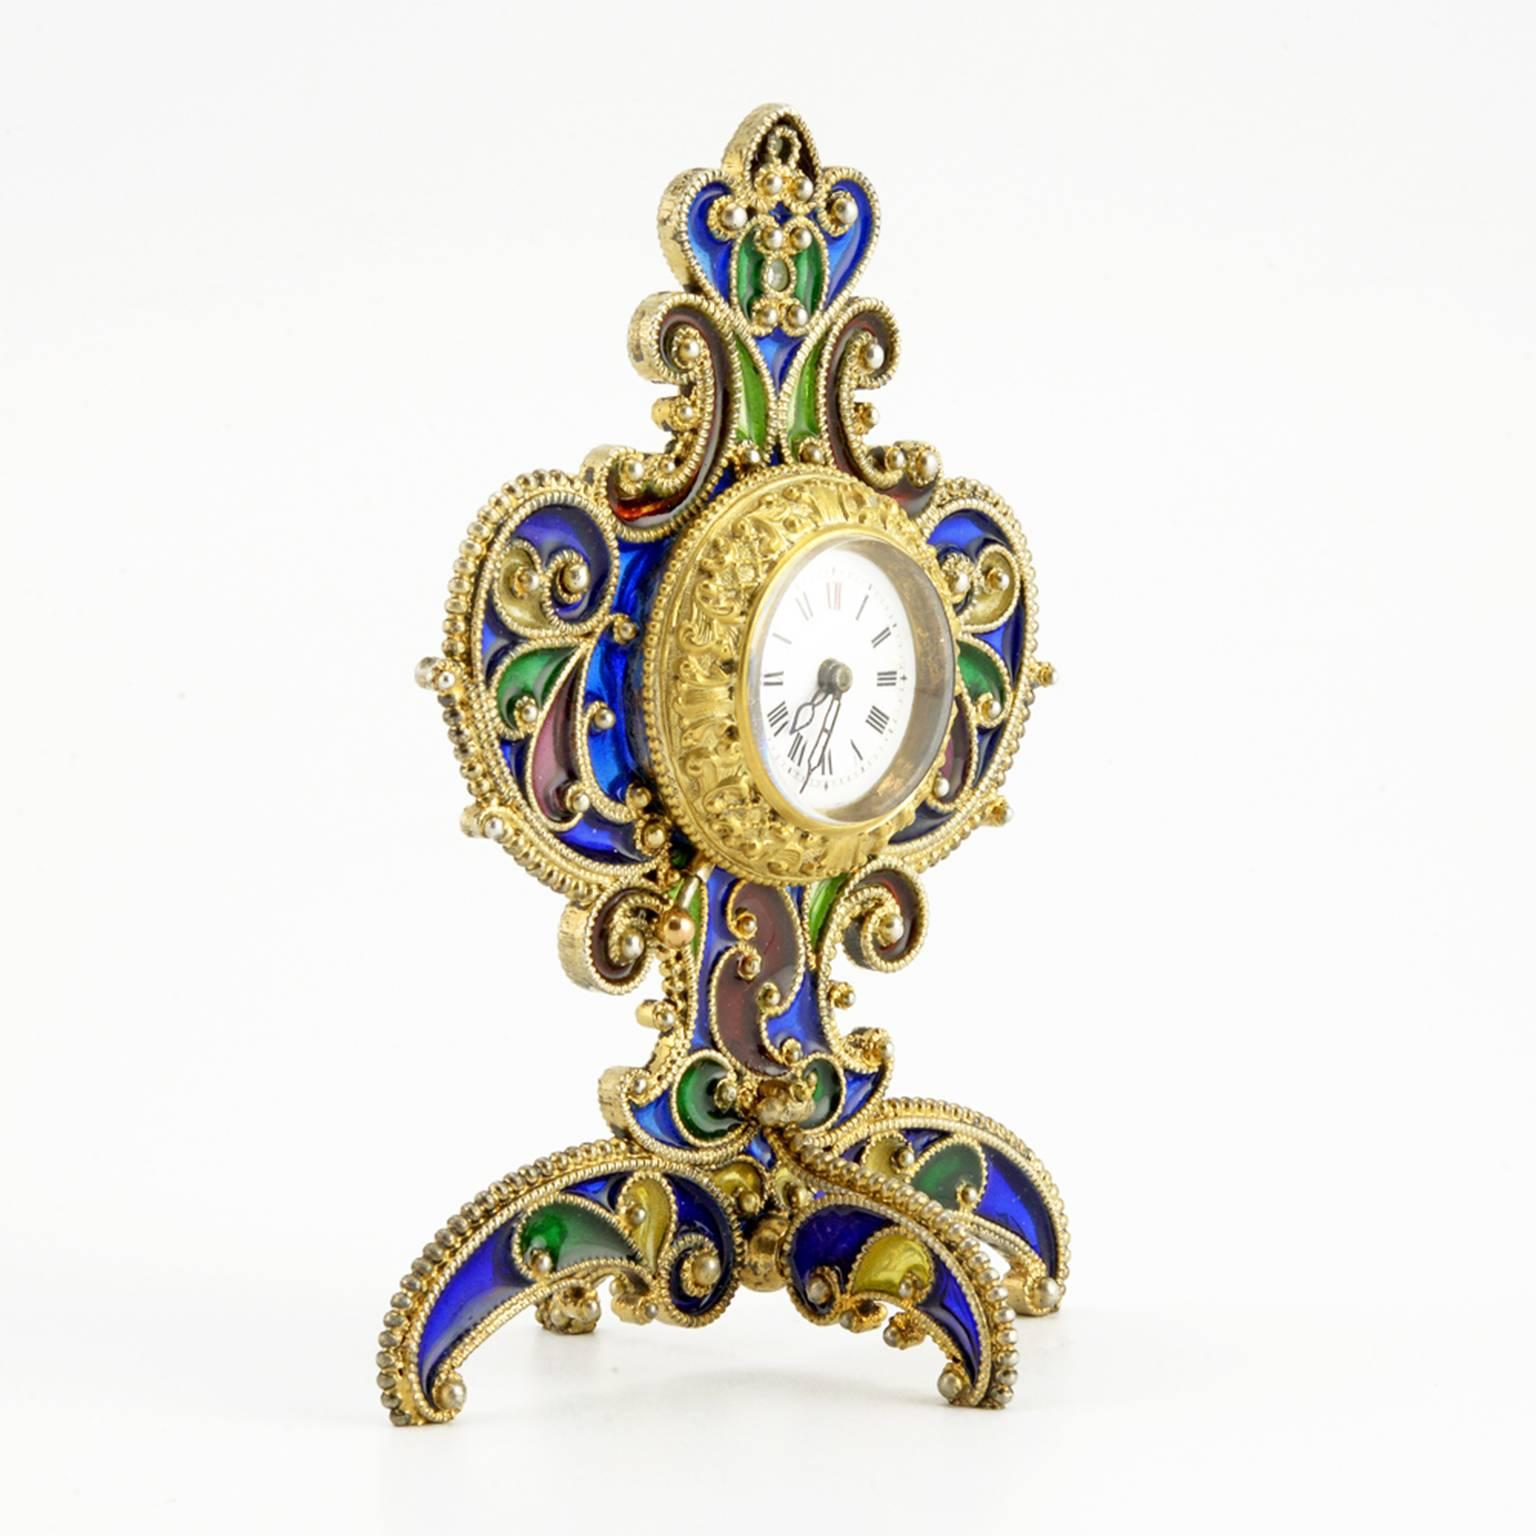 An unusual Austrian silver gilt and plique-à-jour enamel desk clock, Georg Adam Scheid, Vienna, circa 1900. The clock with white opaque enamel dial, black and red Roman Arabic chapter numerals, and pierced black hands, the gilded silver bezel cast